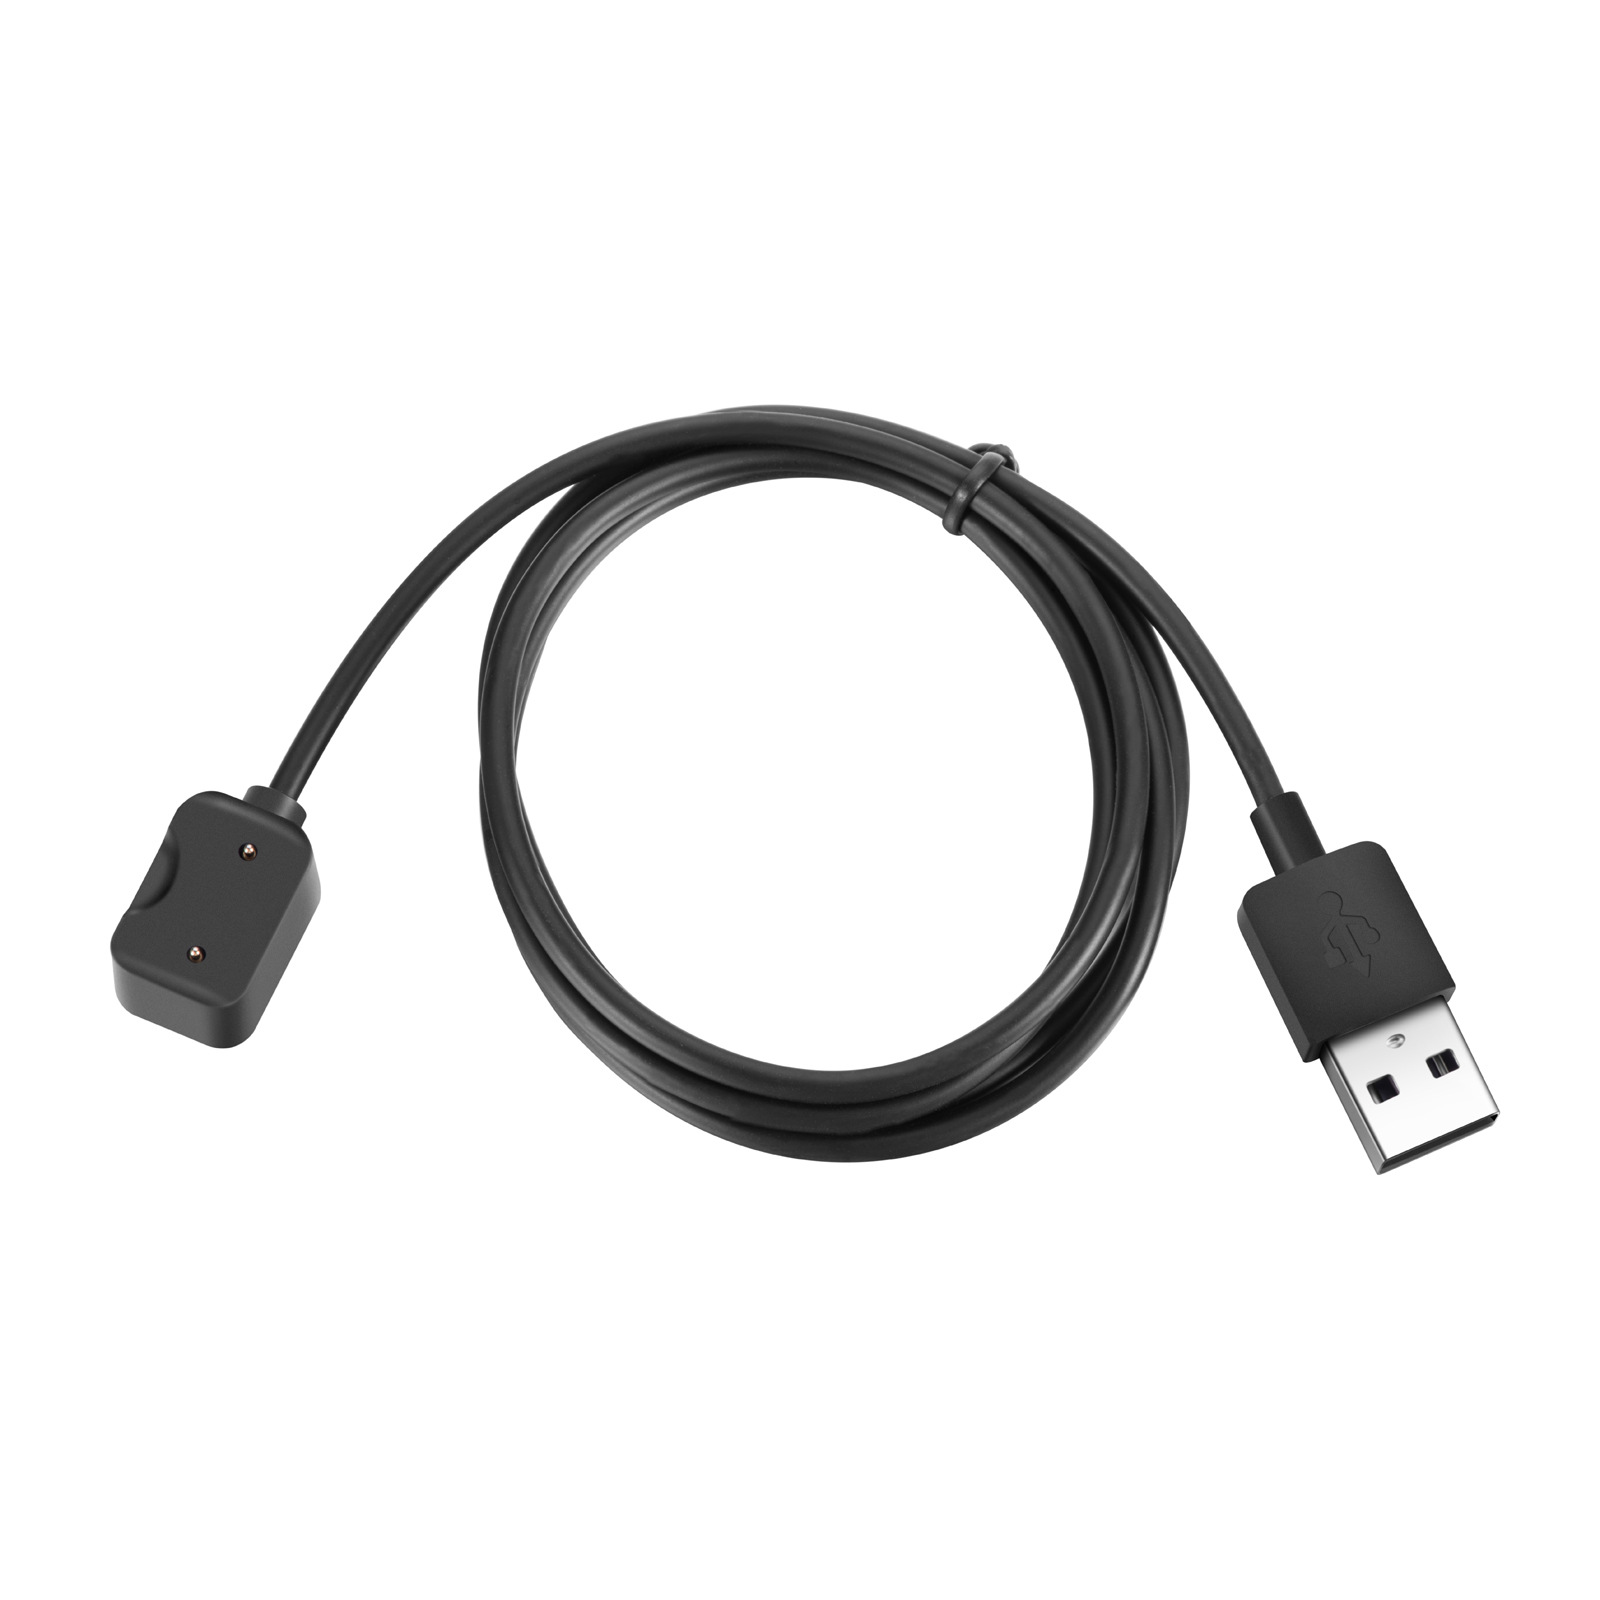 Bakeey-1-Meter-Magnetic-Charger-Cable-Watch-Cable-for-Amazfit-Cor-MiDong-Smart-Watch-1431953-6